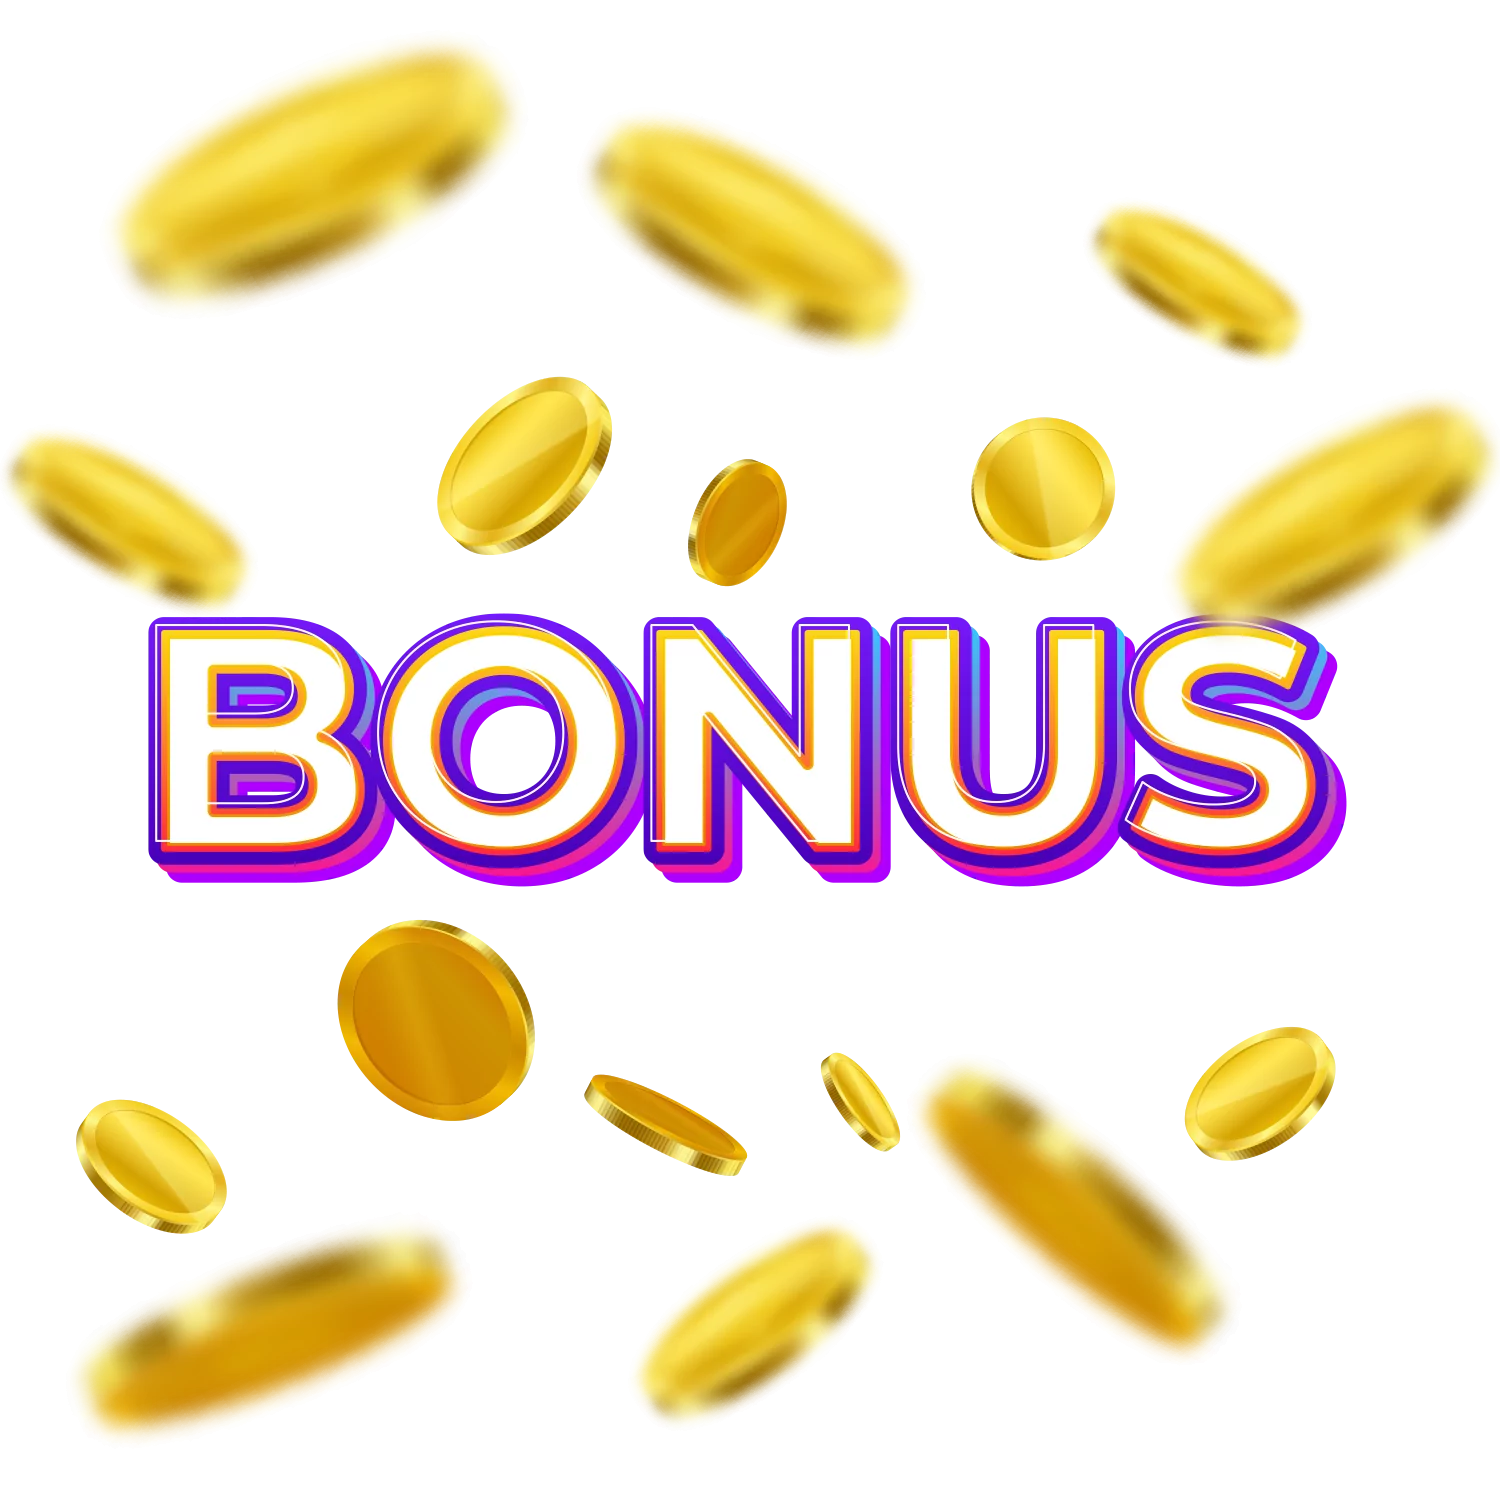 Learn how to get a bonus from the JVSpin Casino and use it to play games.